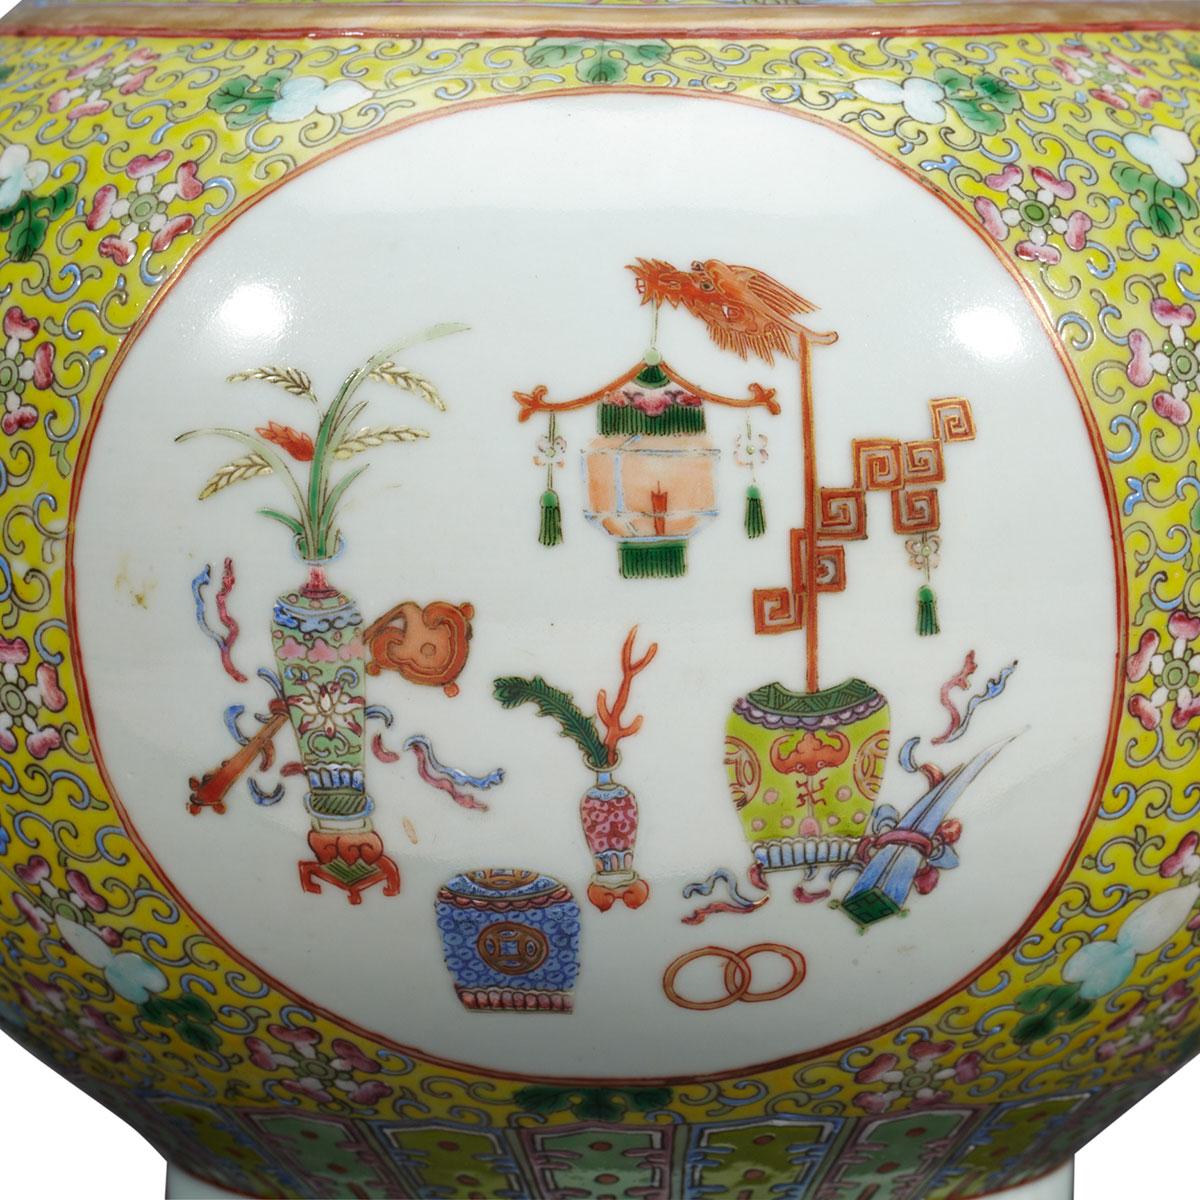 Famille Rose Yellow Ground Medallion Vase, Guangxu Mark and Period (1875-1908)